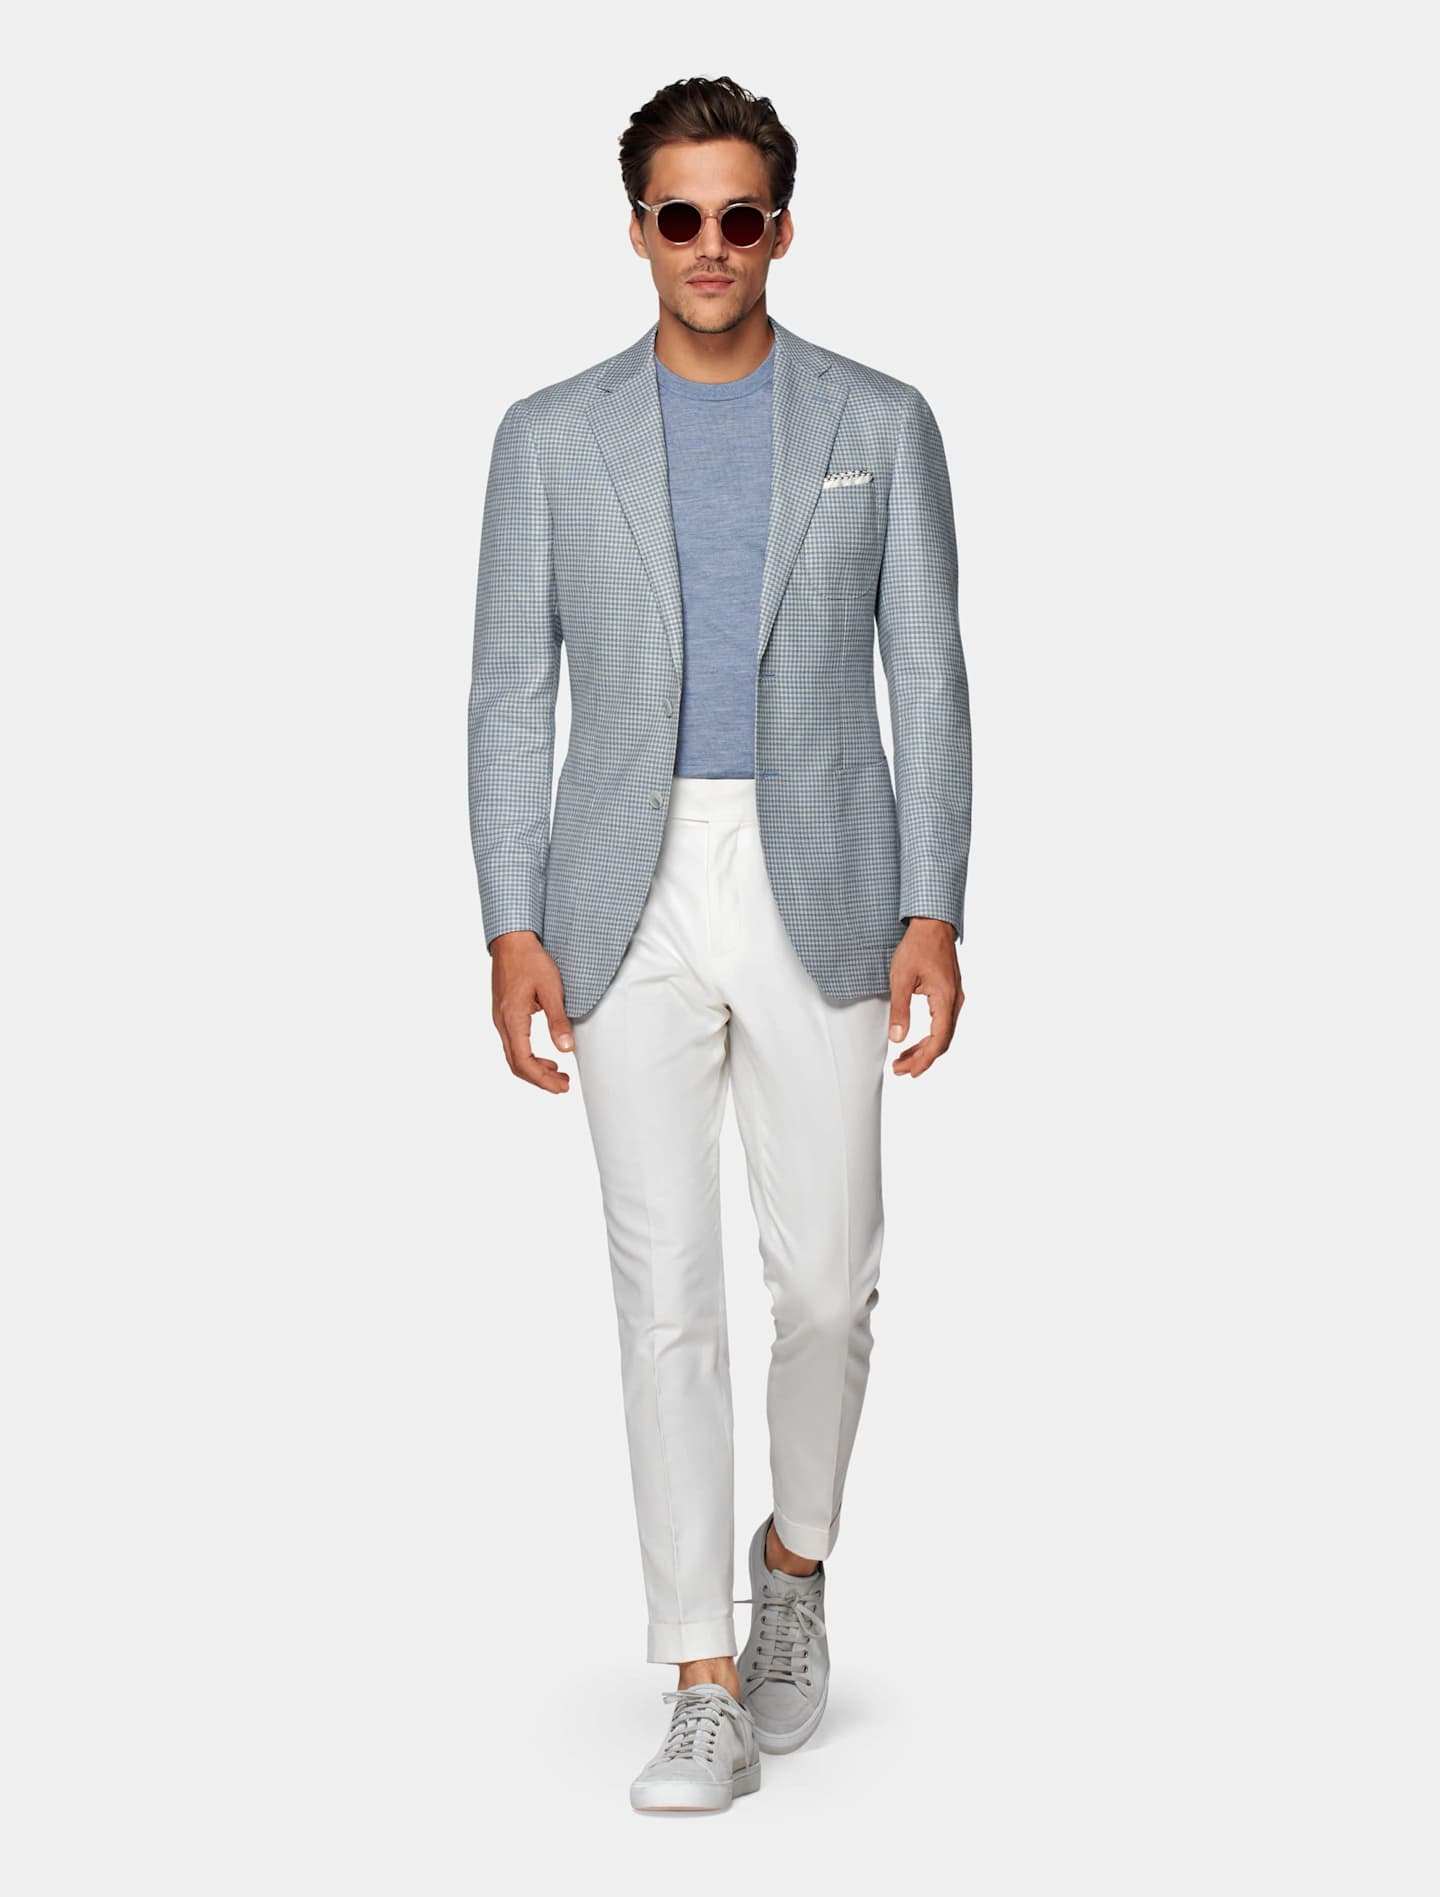 A light blue sharp tailored jacket to complement a smart casual wedding code.